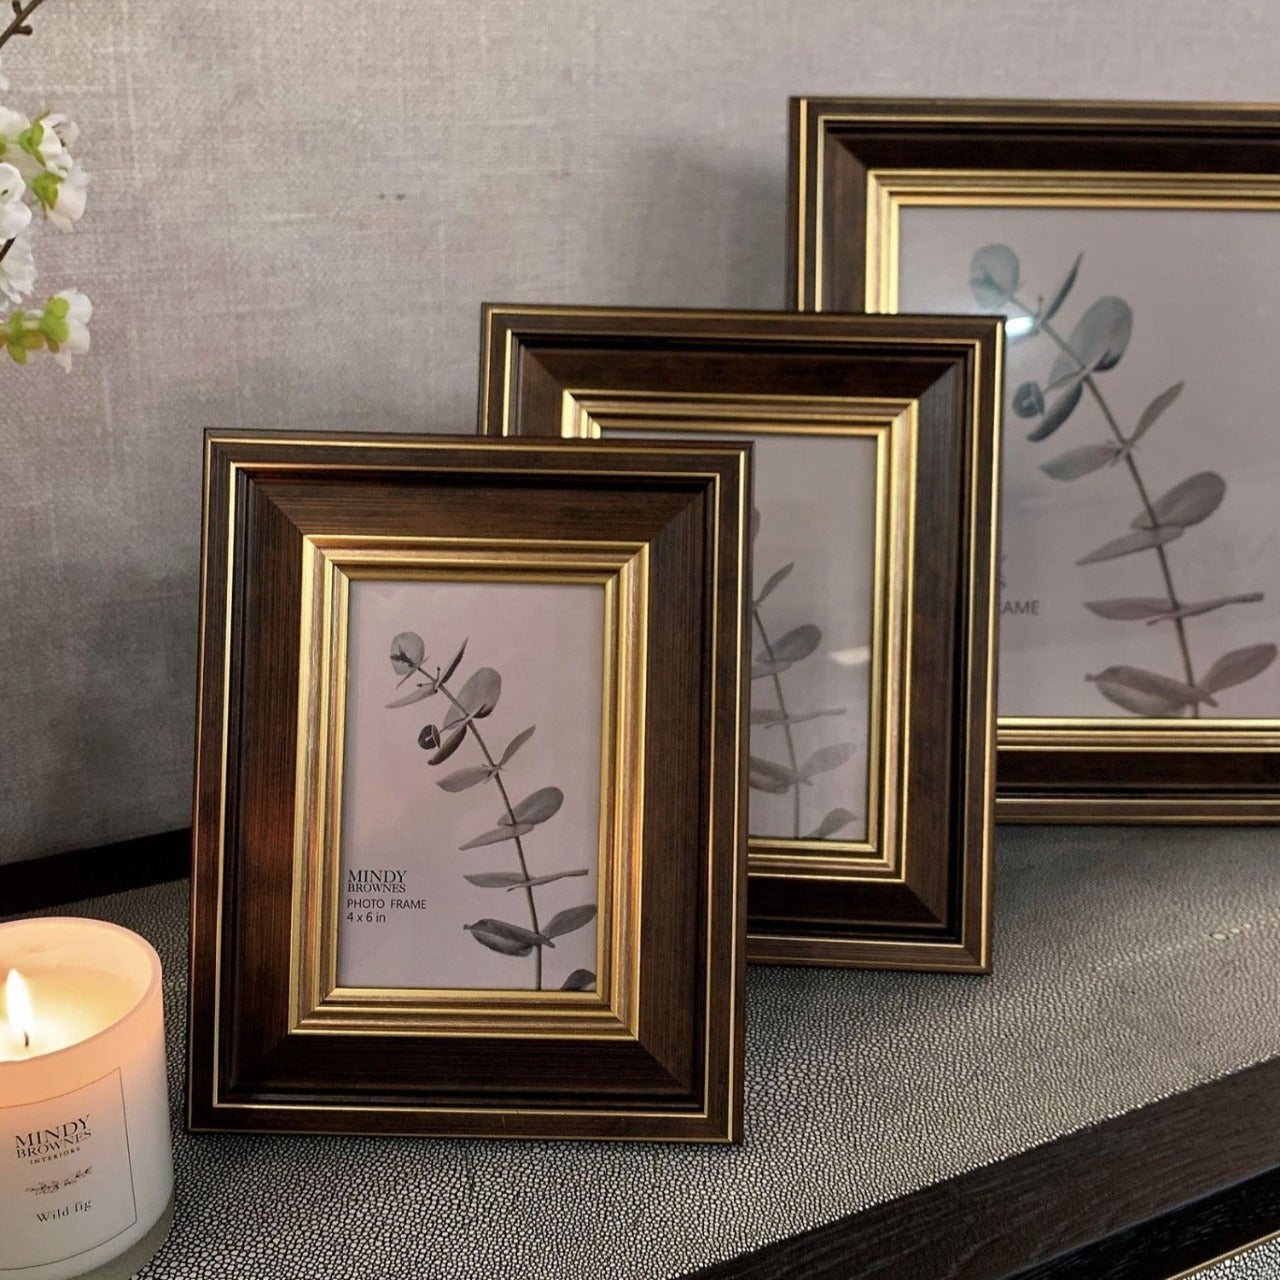 Mindy Brownes Dara Picture Frame (4 x 6)  Capture your special moments with a frame from Mindy Brownes. Black and Gold in colour, a classic design combination.